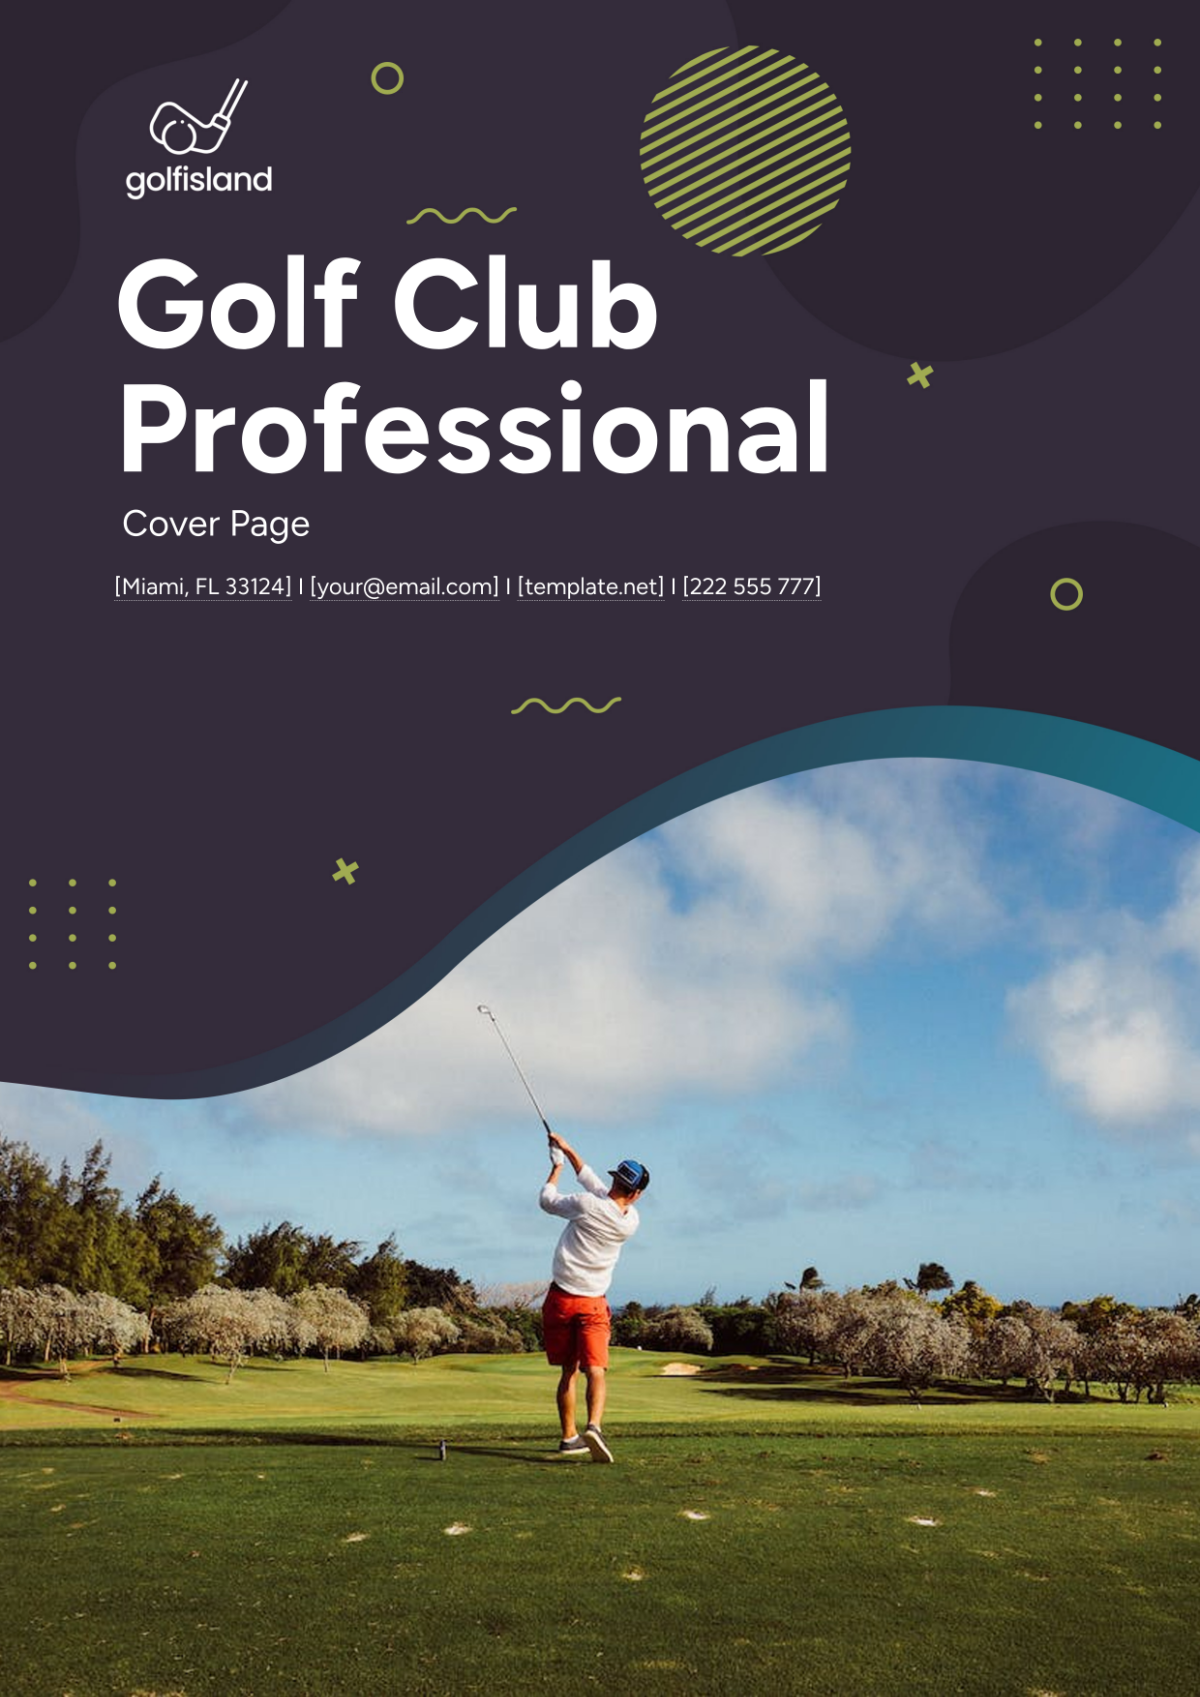 Free Golf Club Professional Cover Page Template